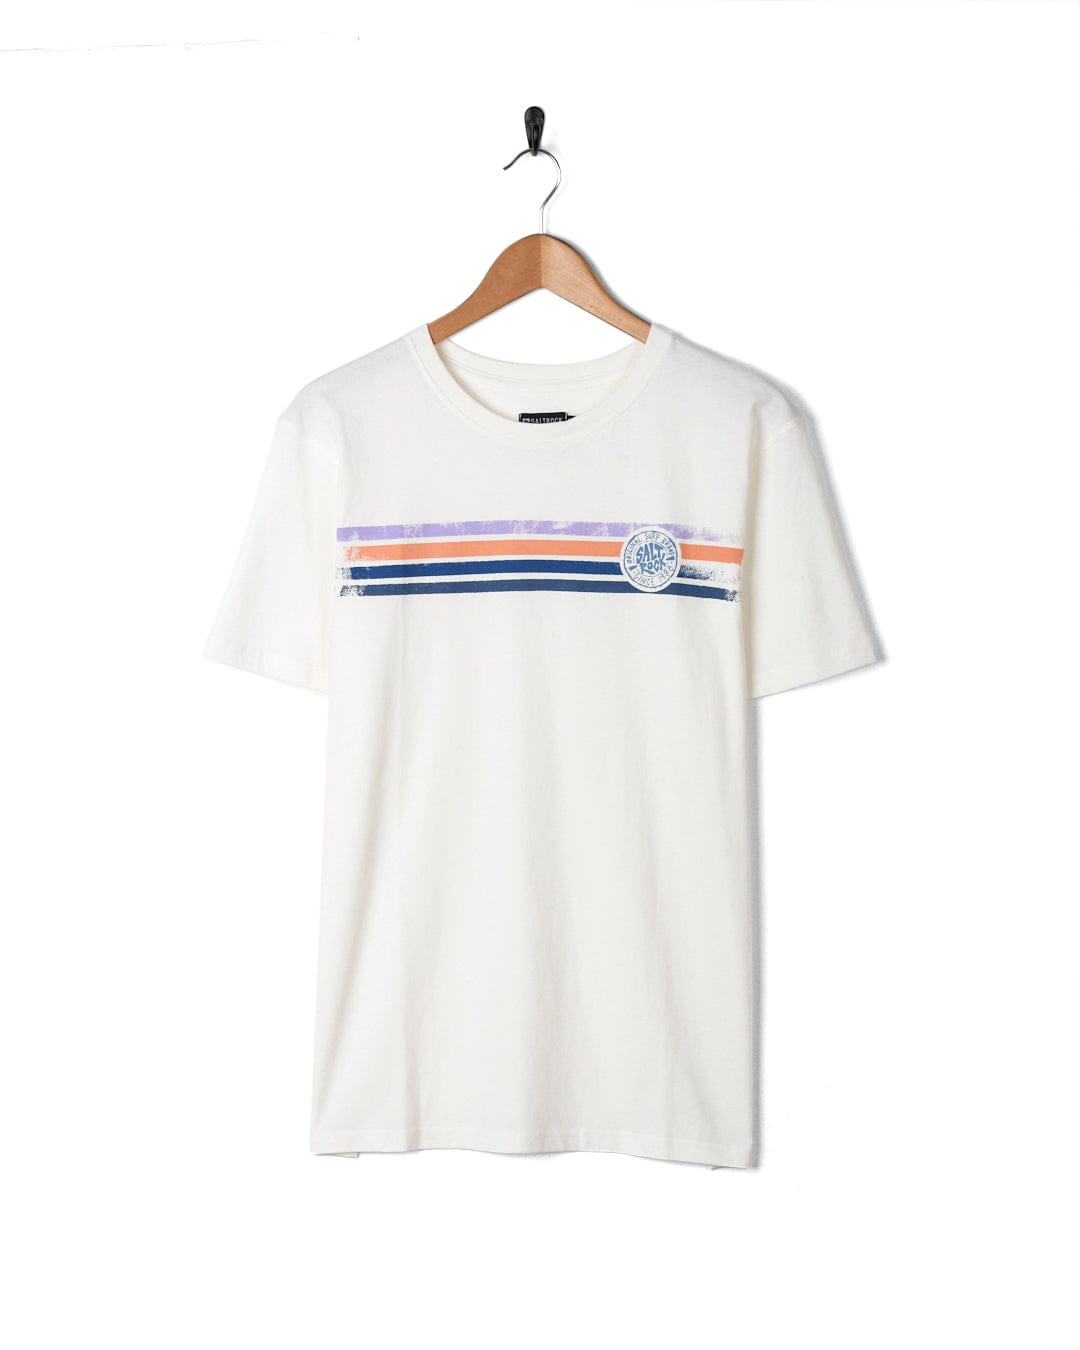 Spray Stripe - Mens Short Sleeve T-Shirt - White on a wooden hanger, featuring a varsity-style design with horizontal stripes in blue, red, and white across the chest, and a small circular Saltrock branding logo on the left side. Made from 100% cotton for ultimate comfort.